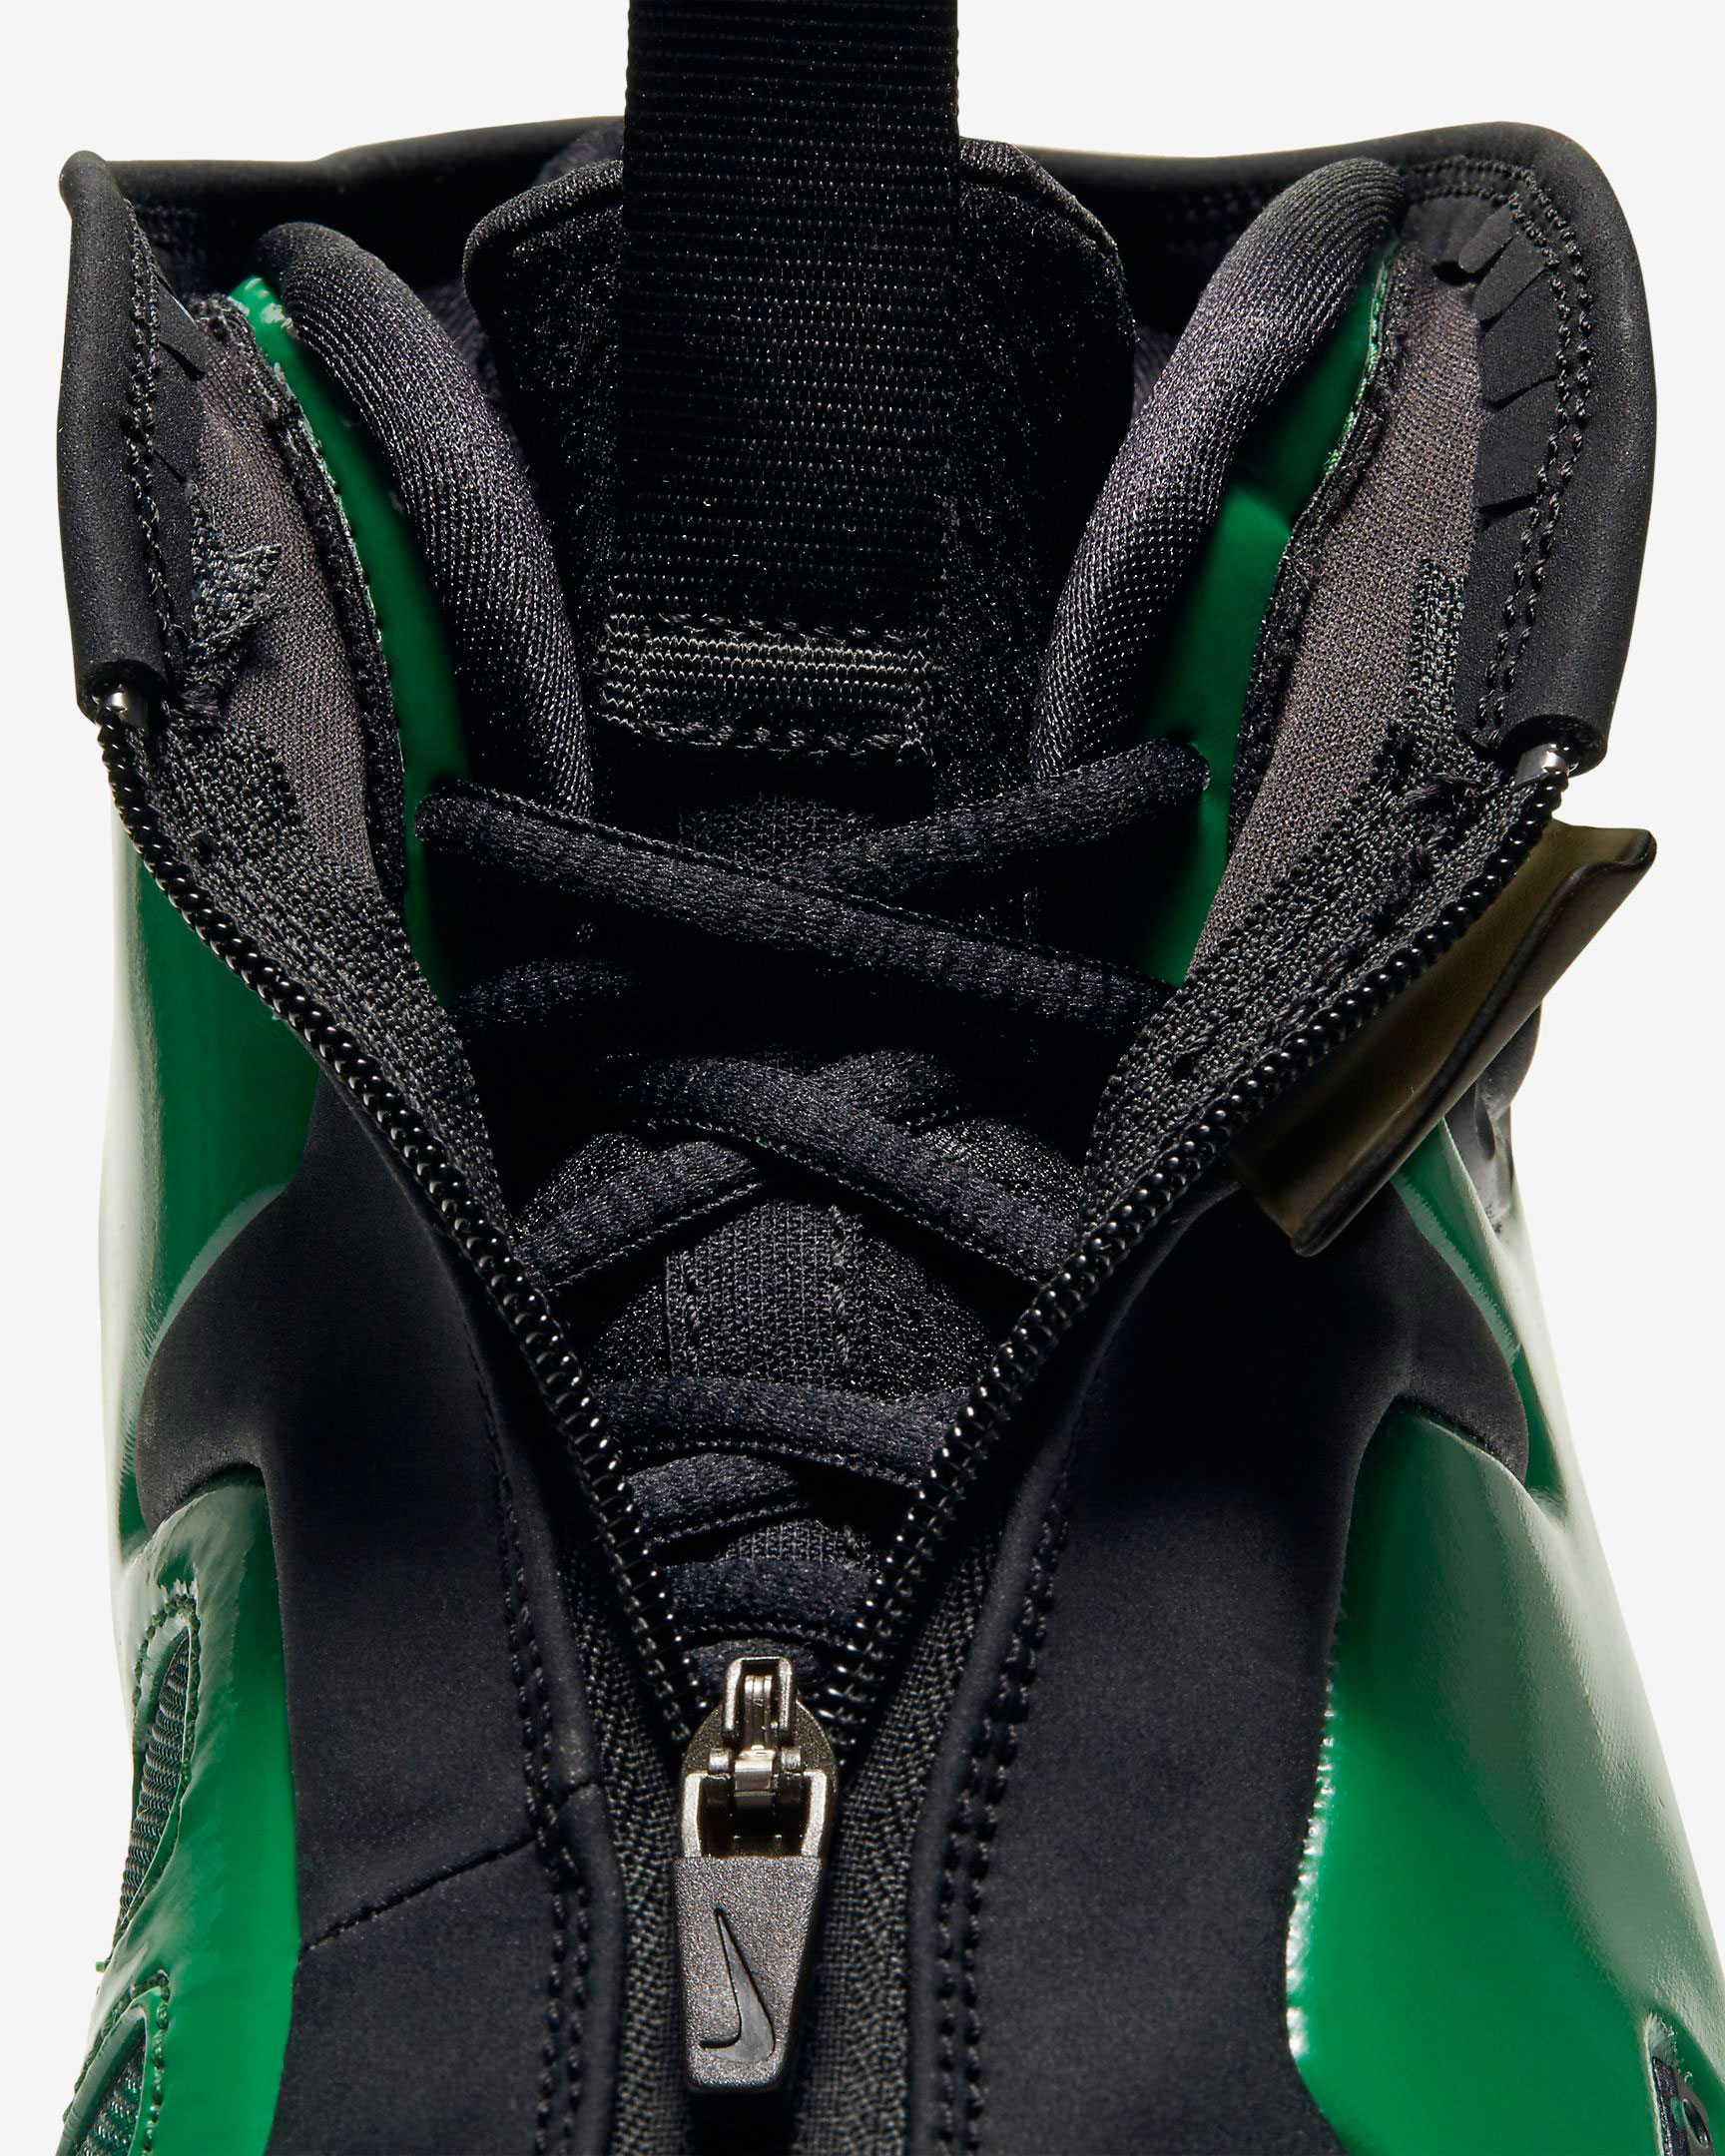 Nike Air Flightposite 2 Electric Green Available Now | SneakerFits.com